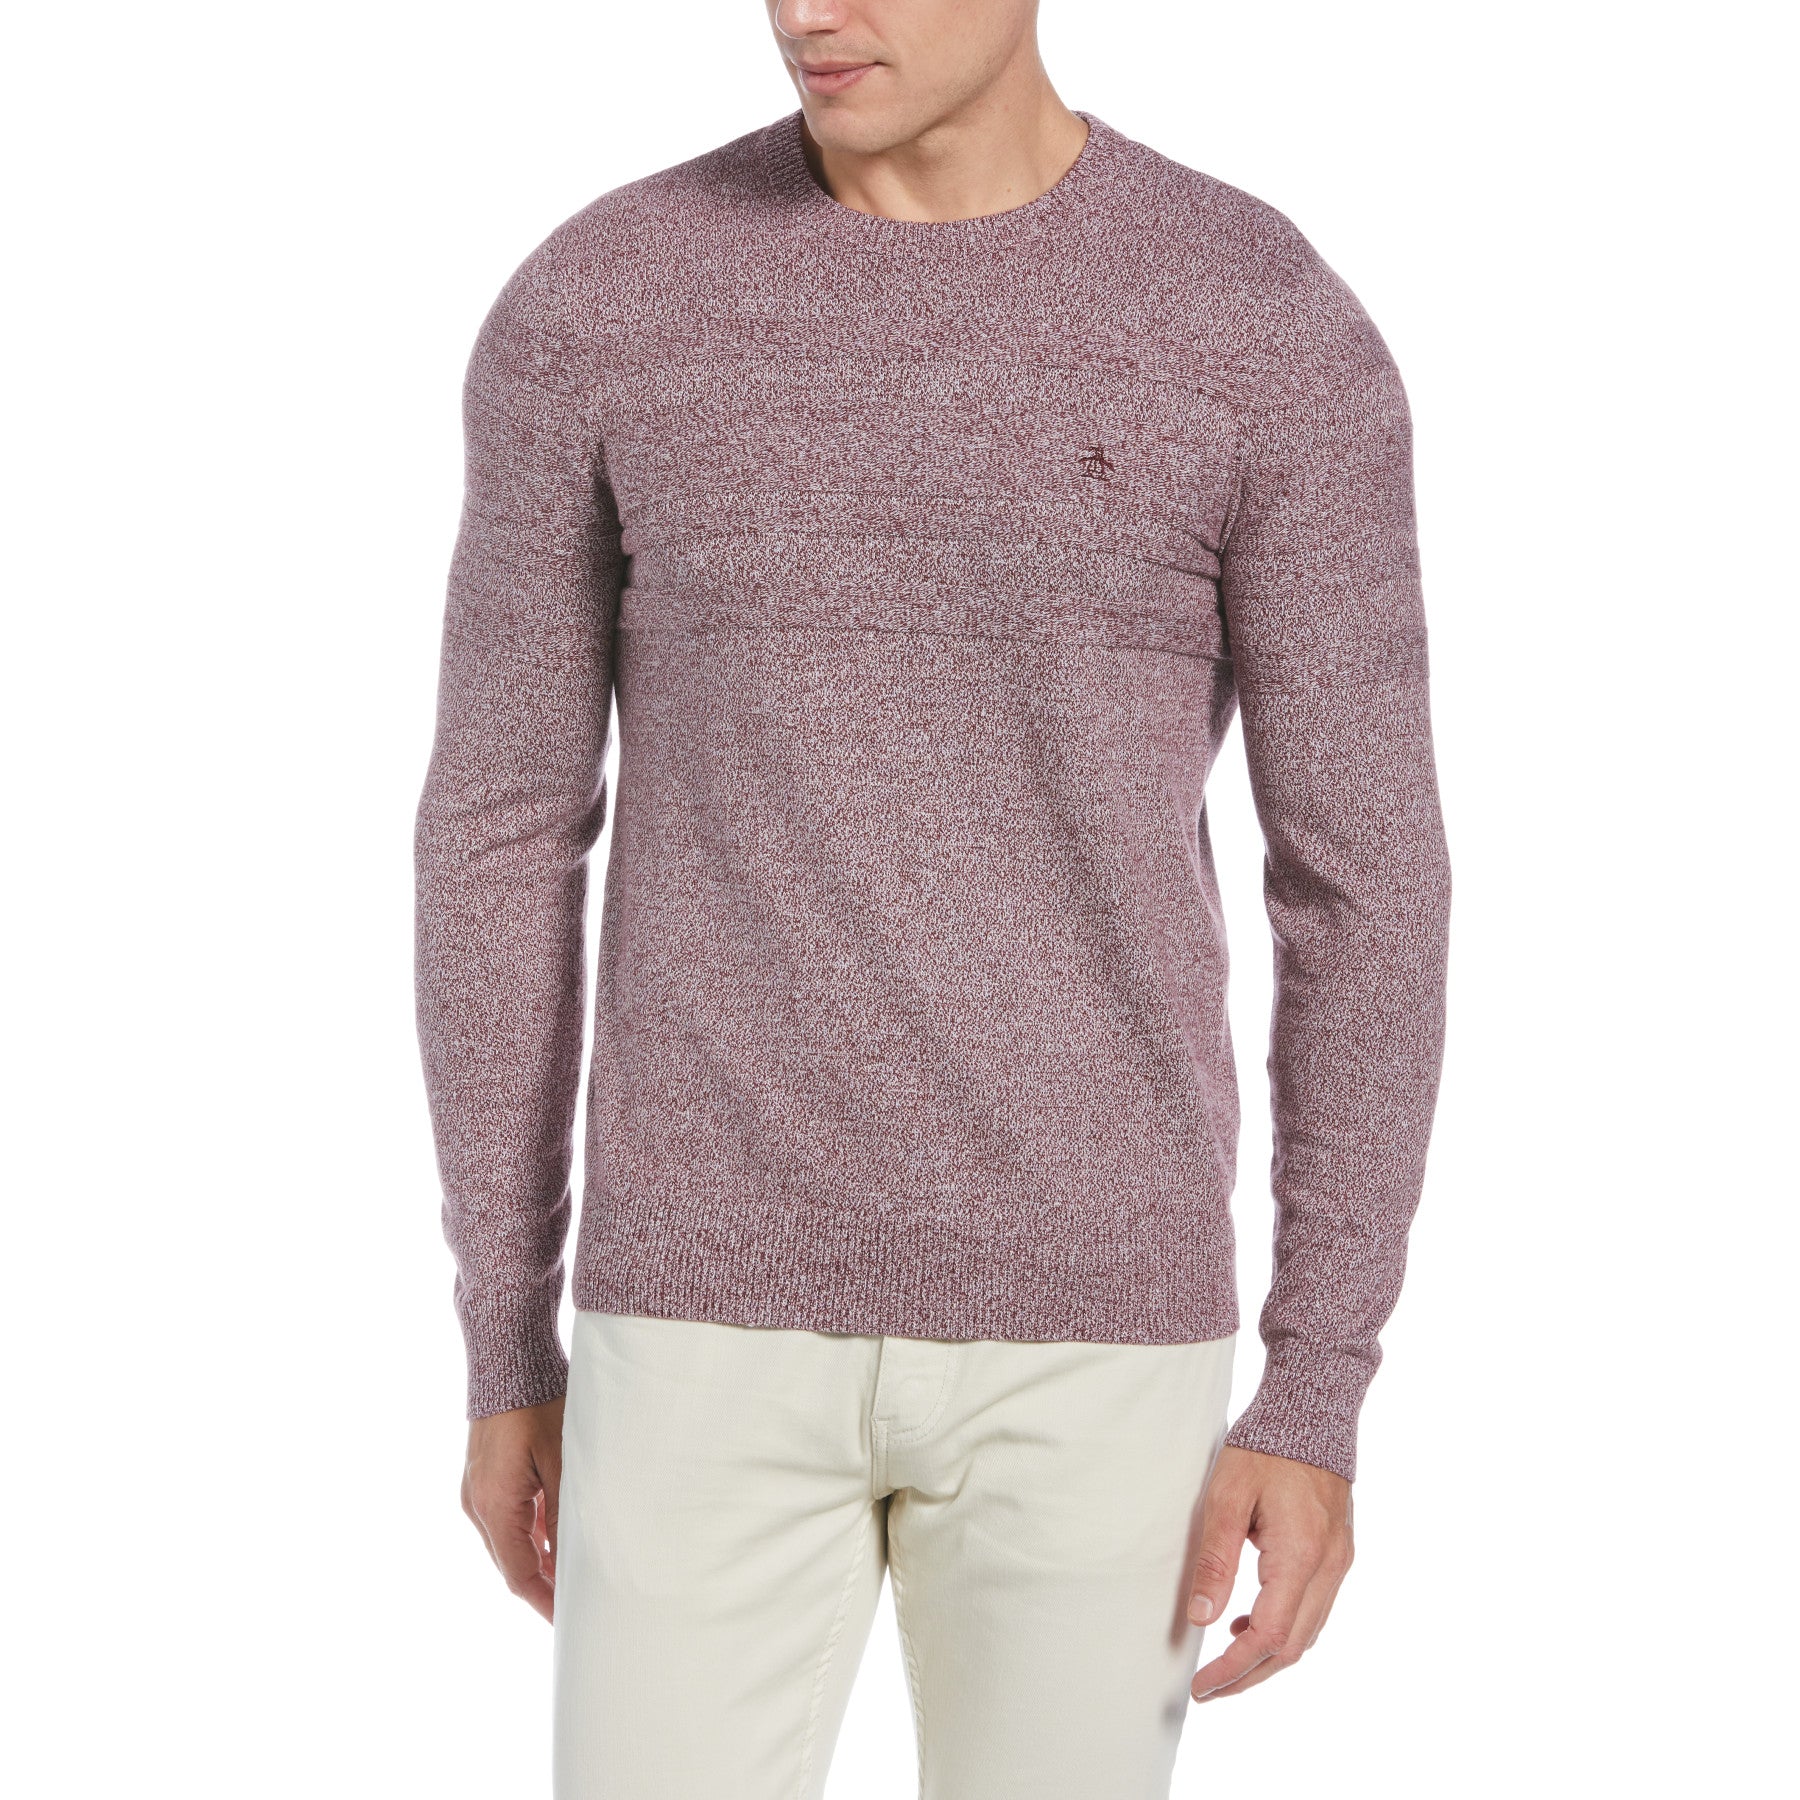 View Marled Crew Neck Jumper In Tawny Port information